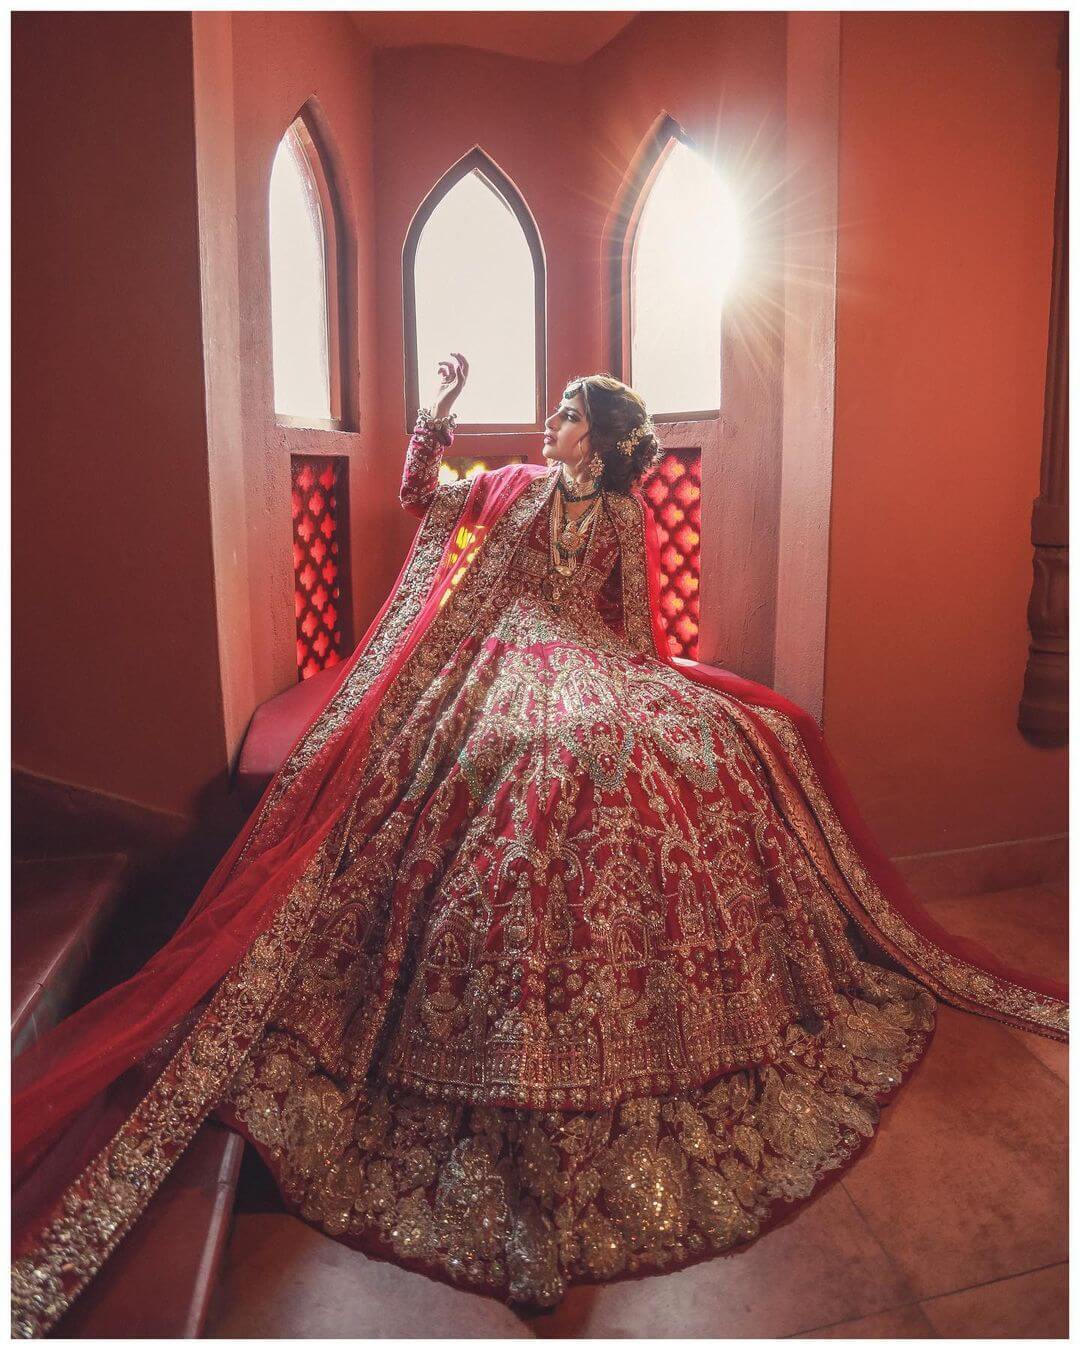 A Stunningly Elegant Look: Red Lehenga with Glittery Embroidery for a Muslim Bride